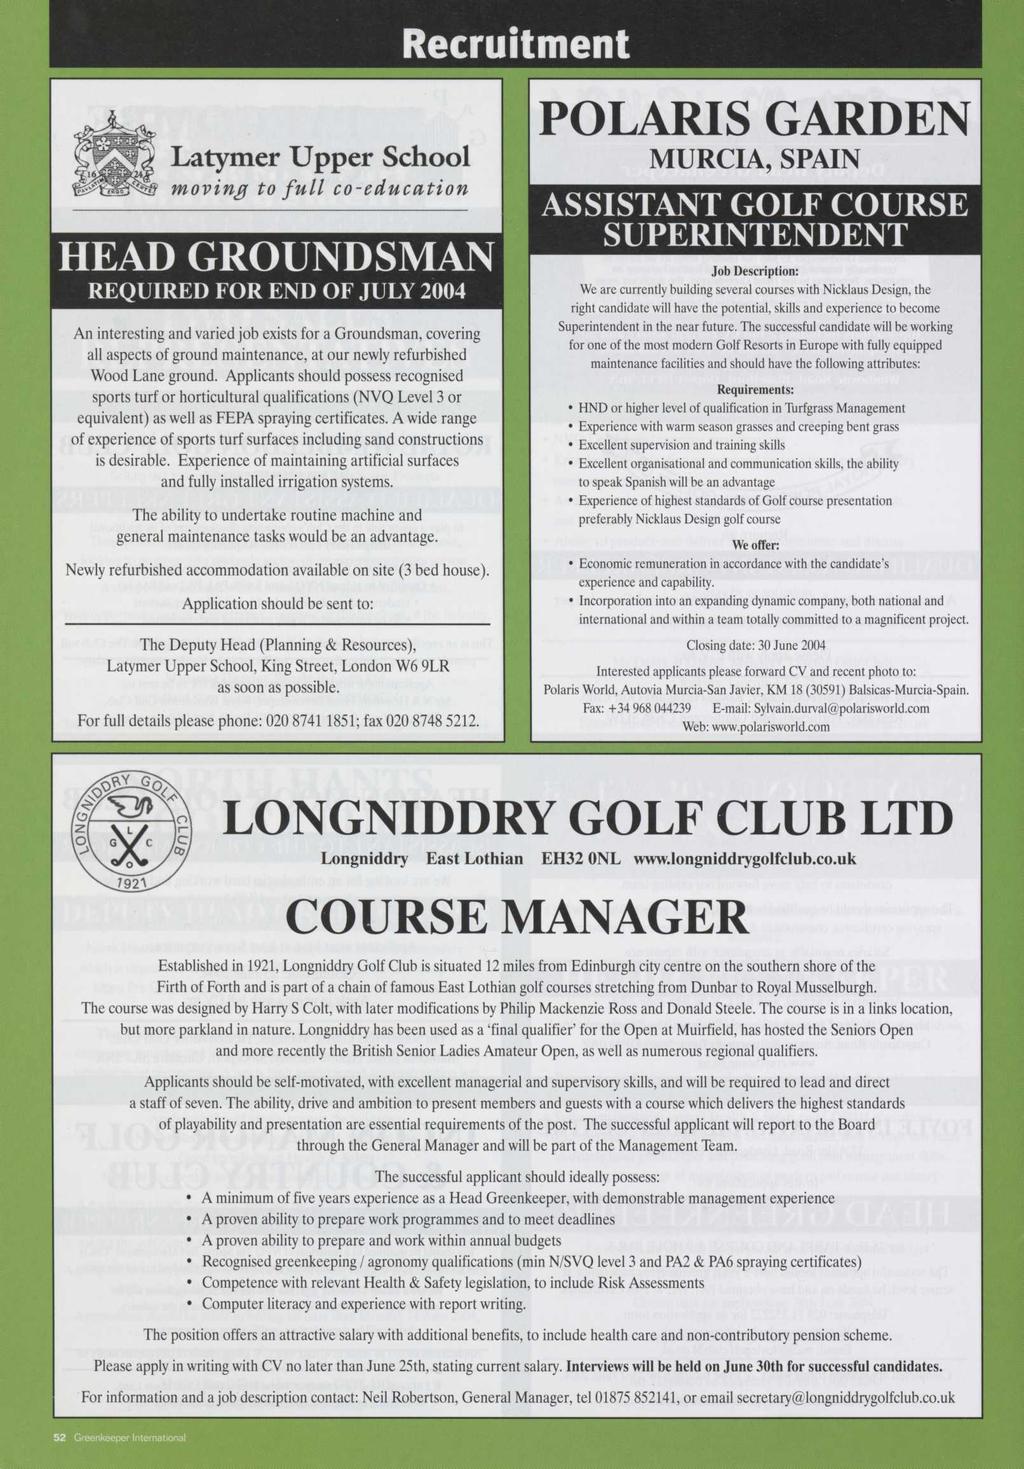 Latymer Upper School moving to full co-education HEAD GROUNDSMAN REQUIRED FOR END OF JULY 2004 An interesting and varied job exists for a Groundsman, covering all aspects of ground maintenance, at